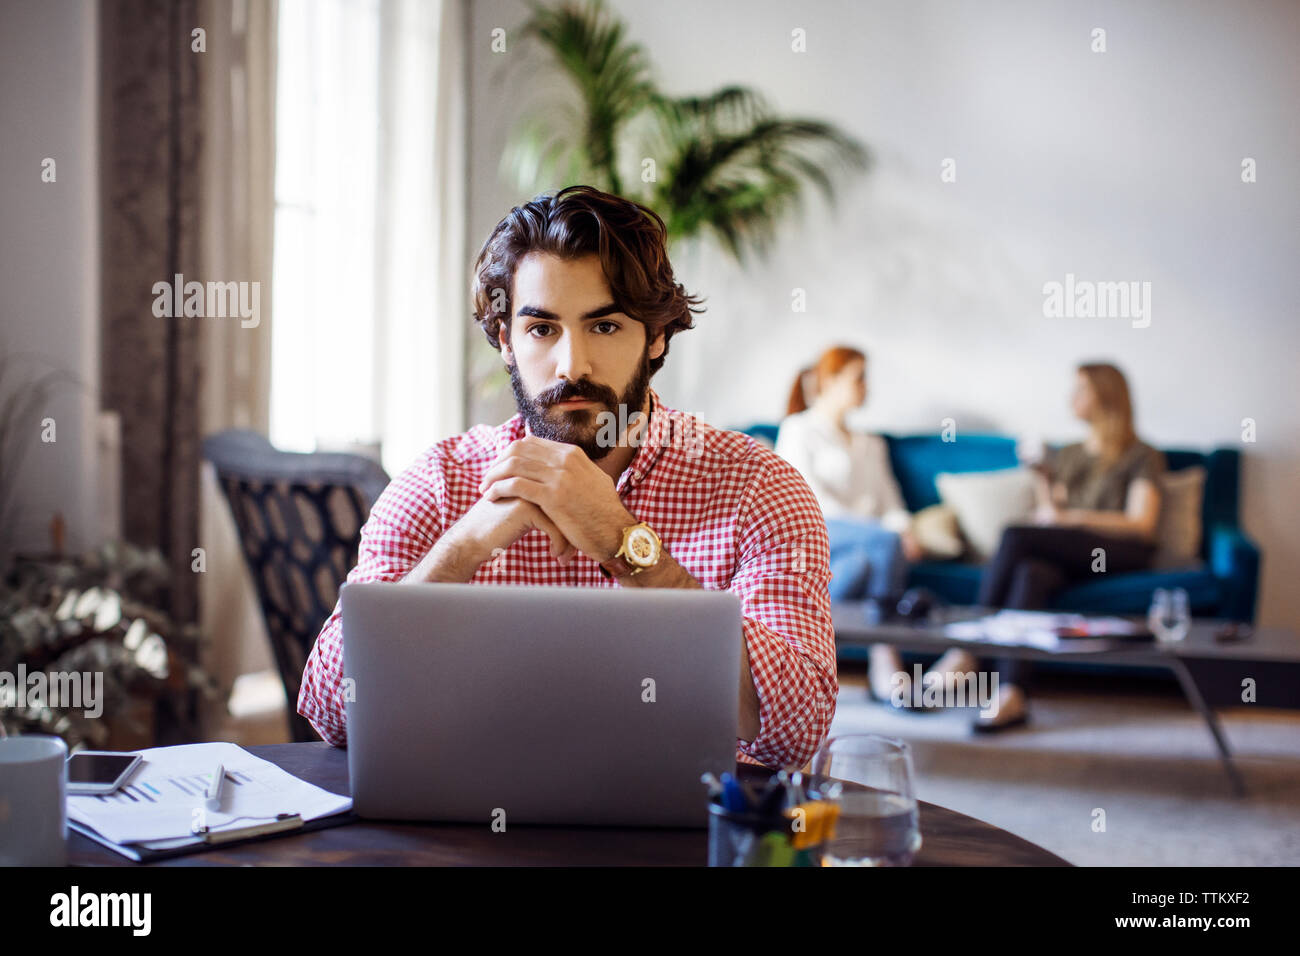 Portrait of businessman sitting at table with laptop in creative office Stock Photo